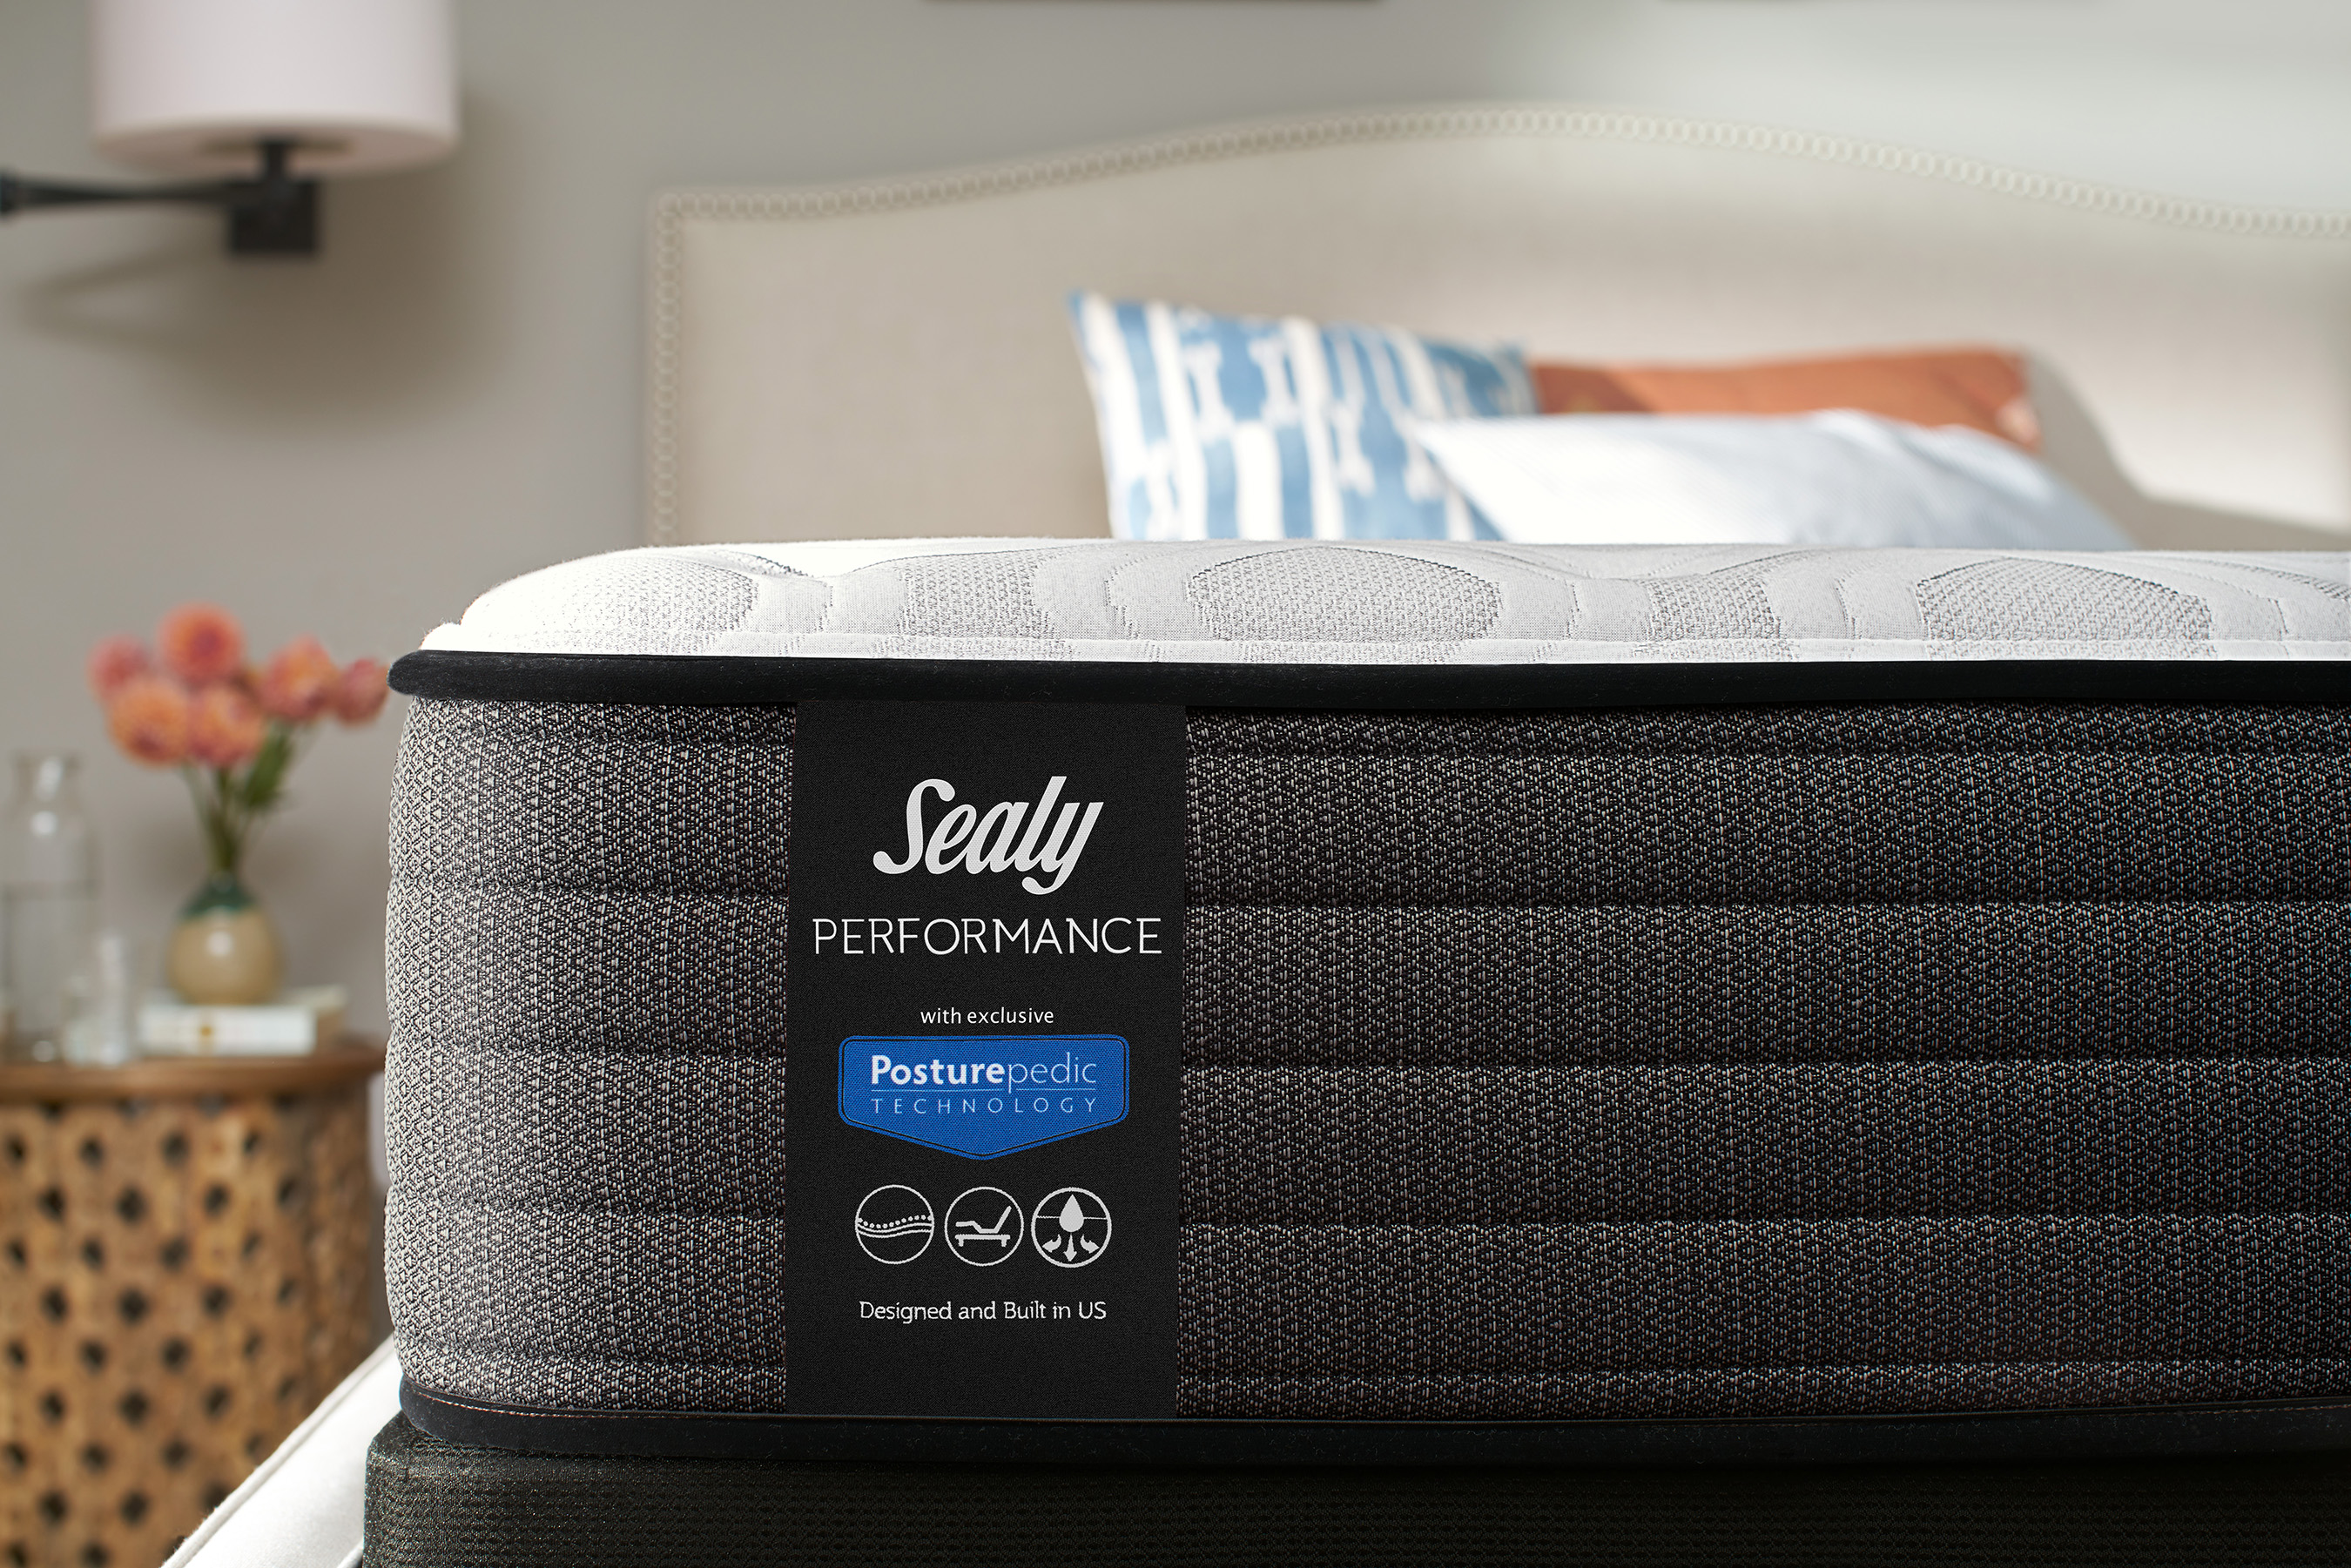 All Performance and Premium Collection mattresses will feature a new Posturepedic Technology logo and revamped label that use visually compelling icons communicating benefits such as MoistureProtect™ (moisture-wicking) and SealyCool™ Gel Memory Foam.